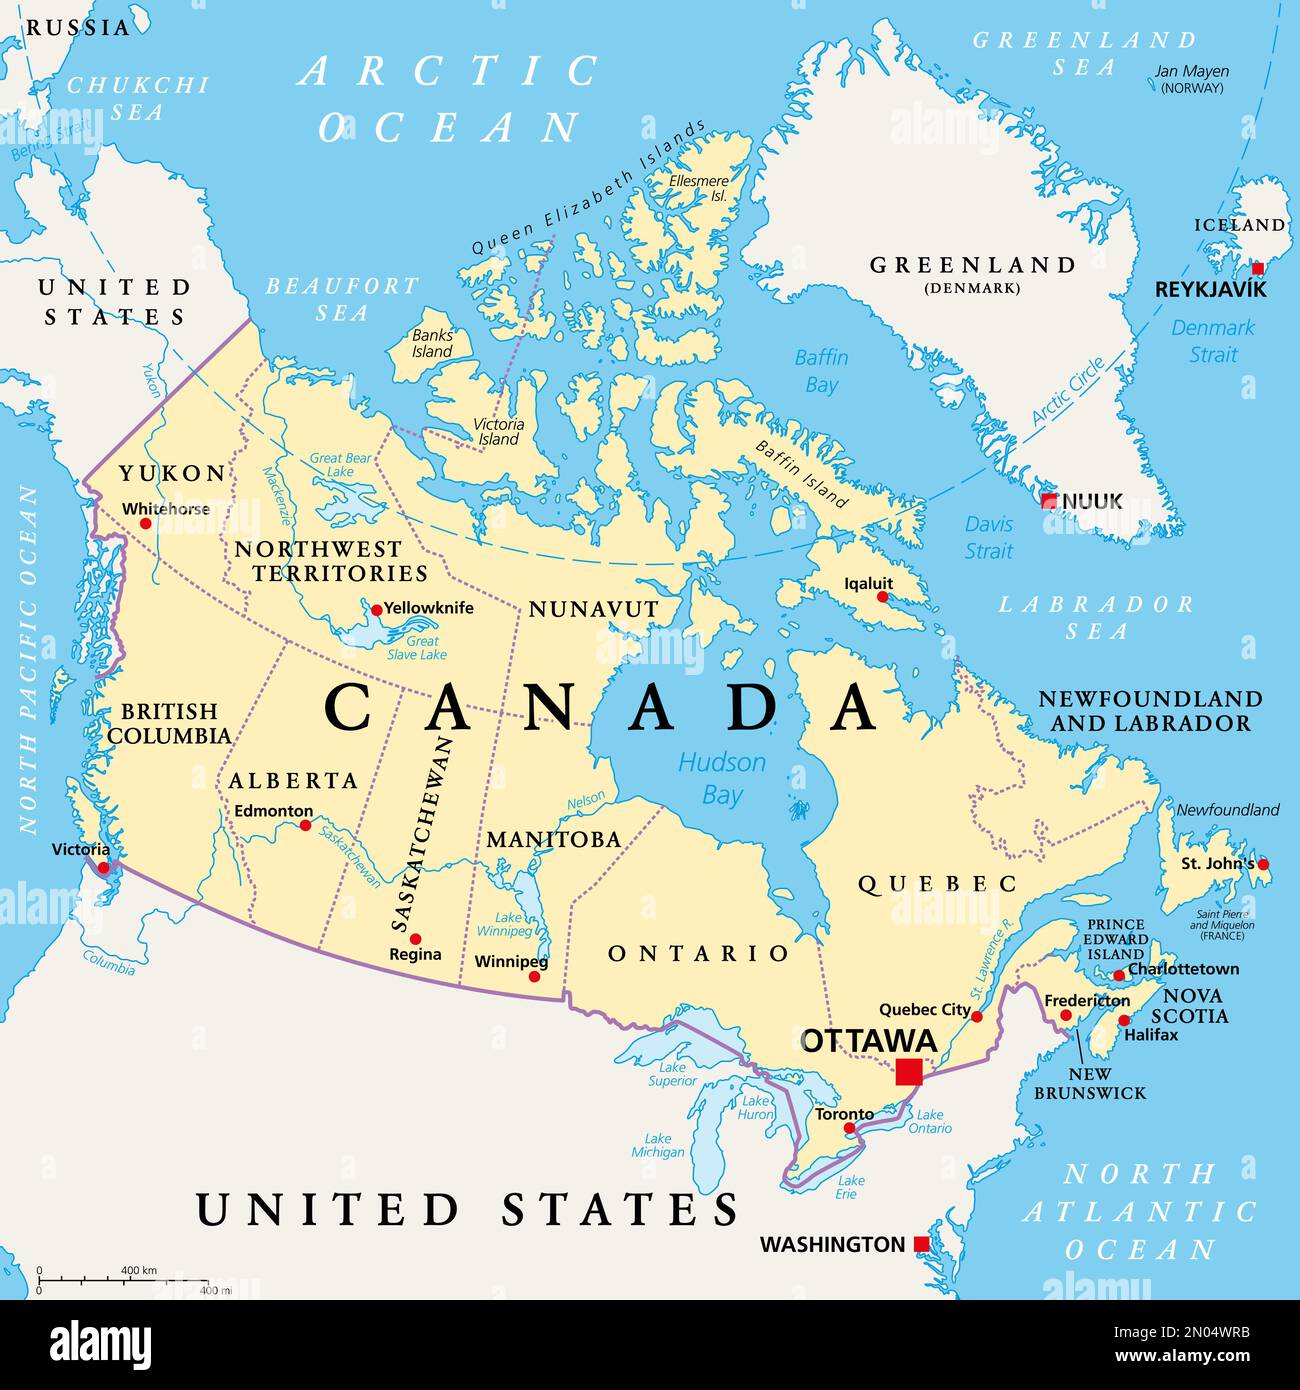 Canada, administrative divisions, political map. The ten provinces and three territories of Canada, with their borders and capitals. Stock Photo